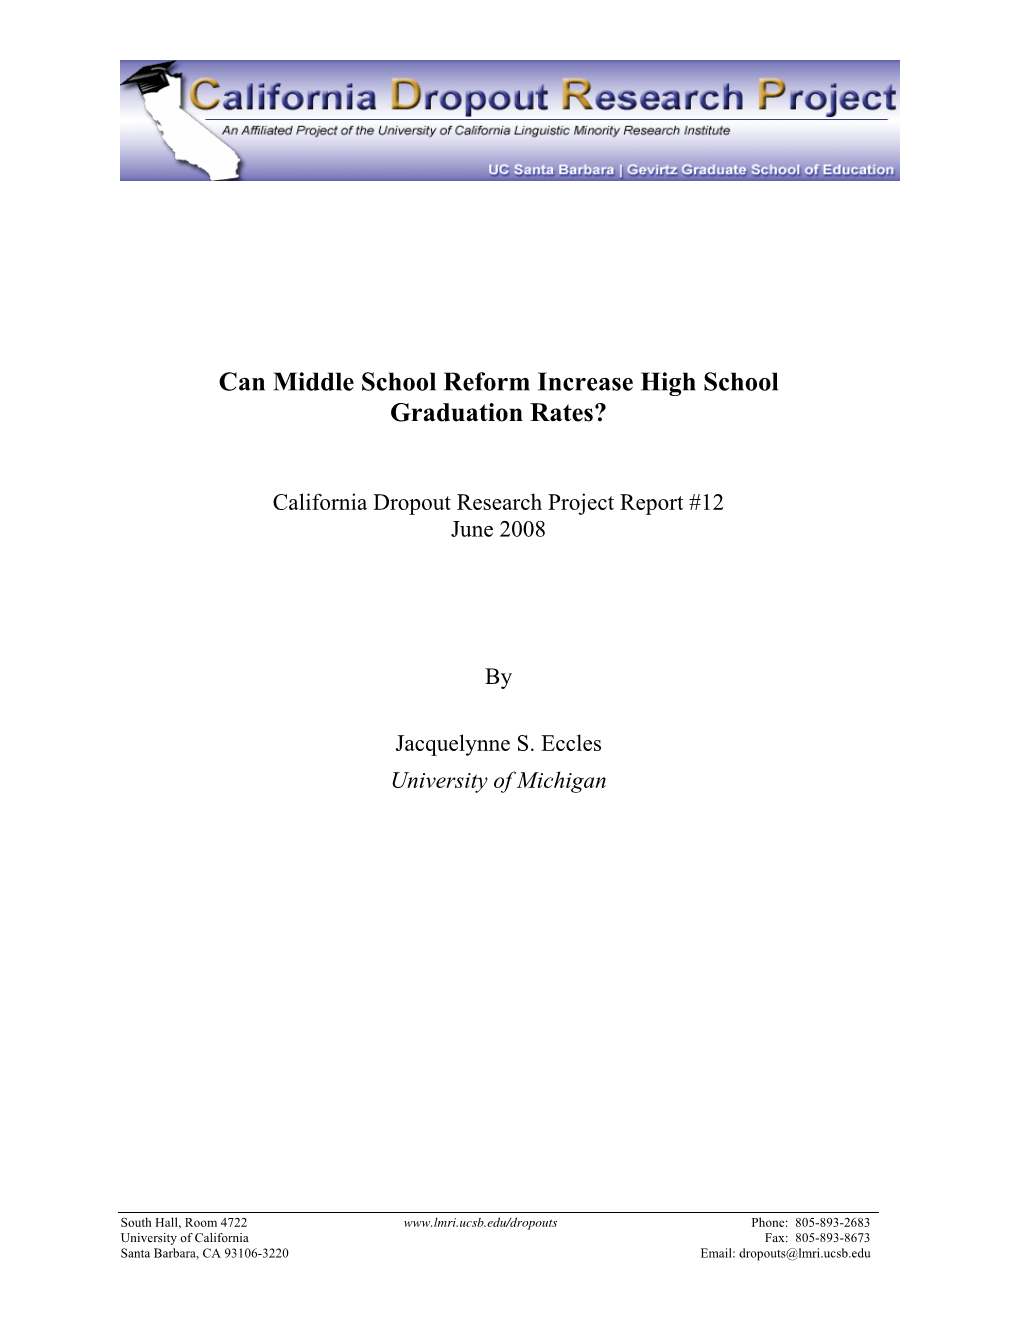 Can Middle School Reform Increase High School Graduation Rates?